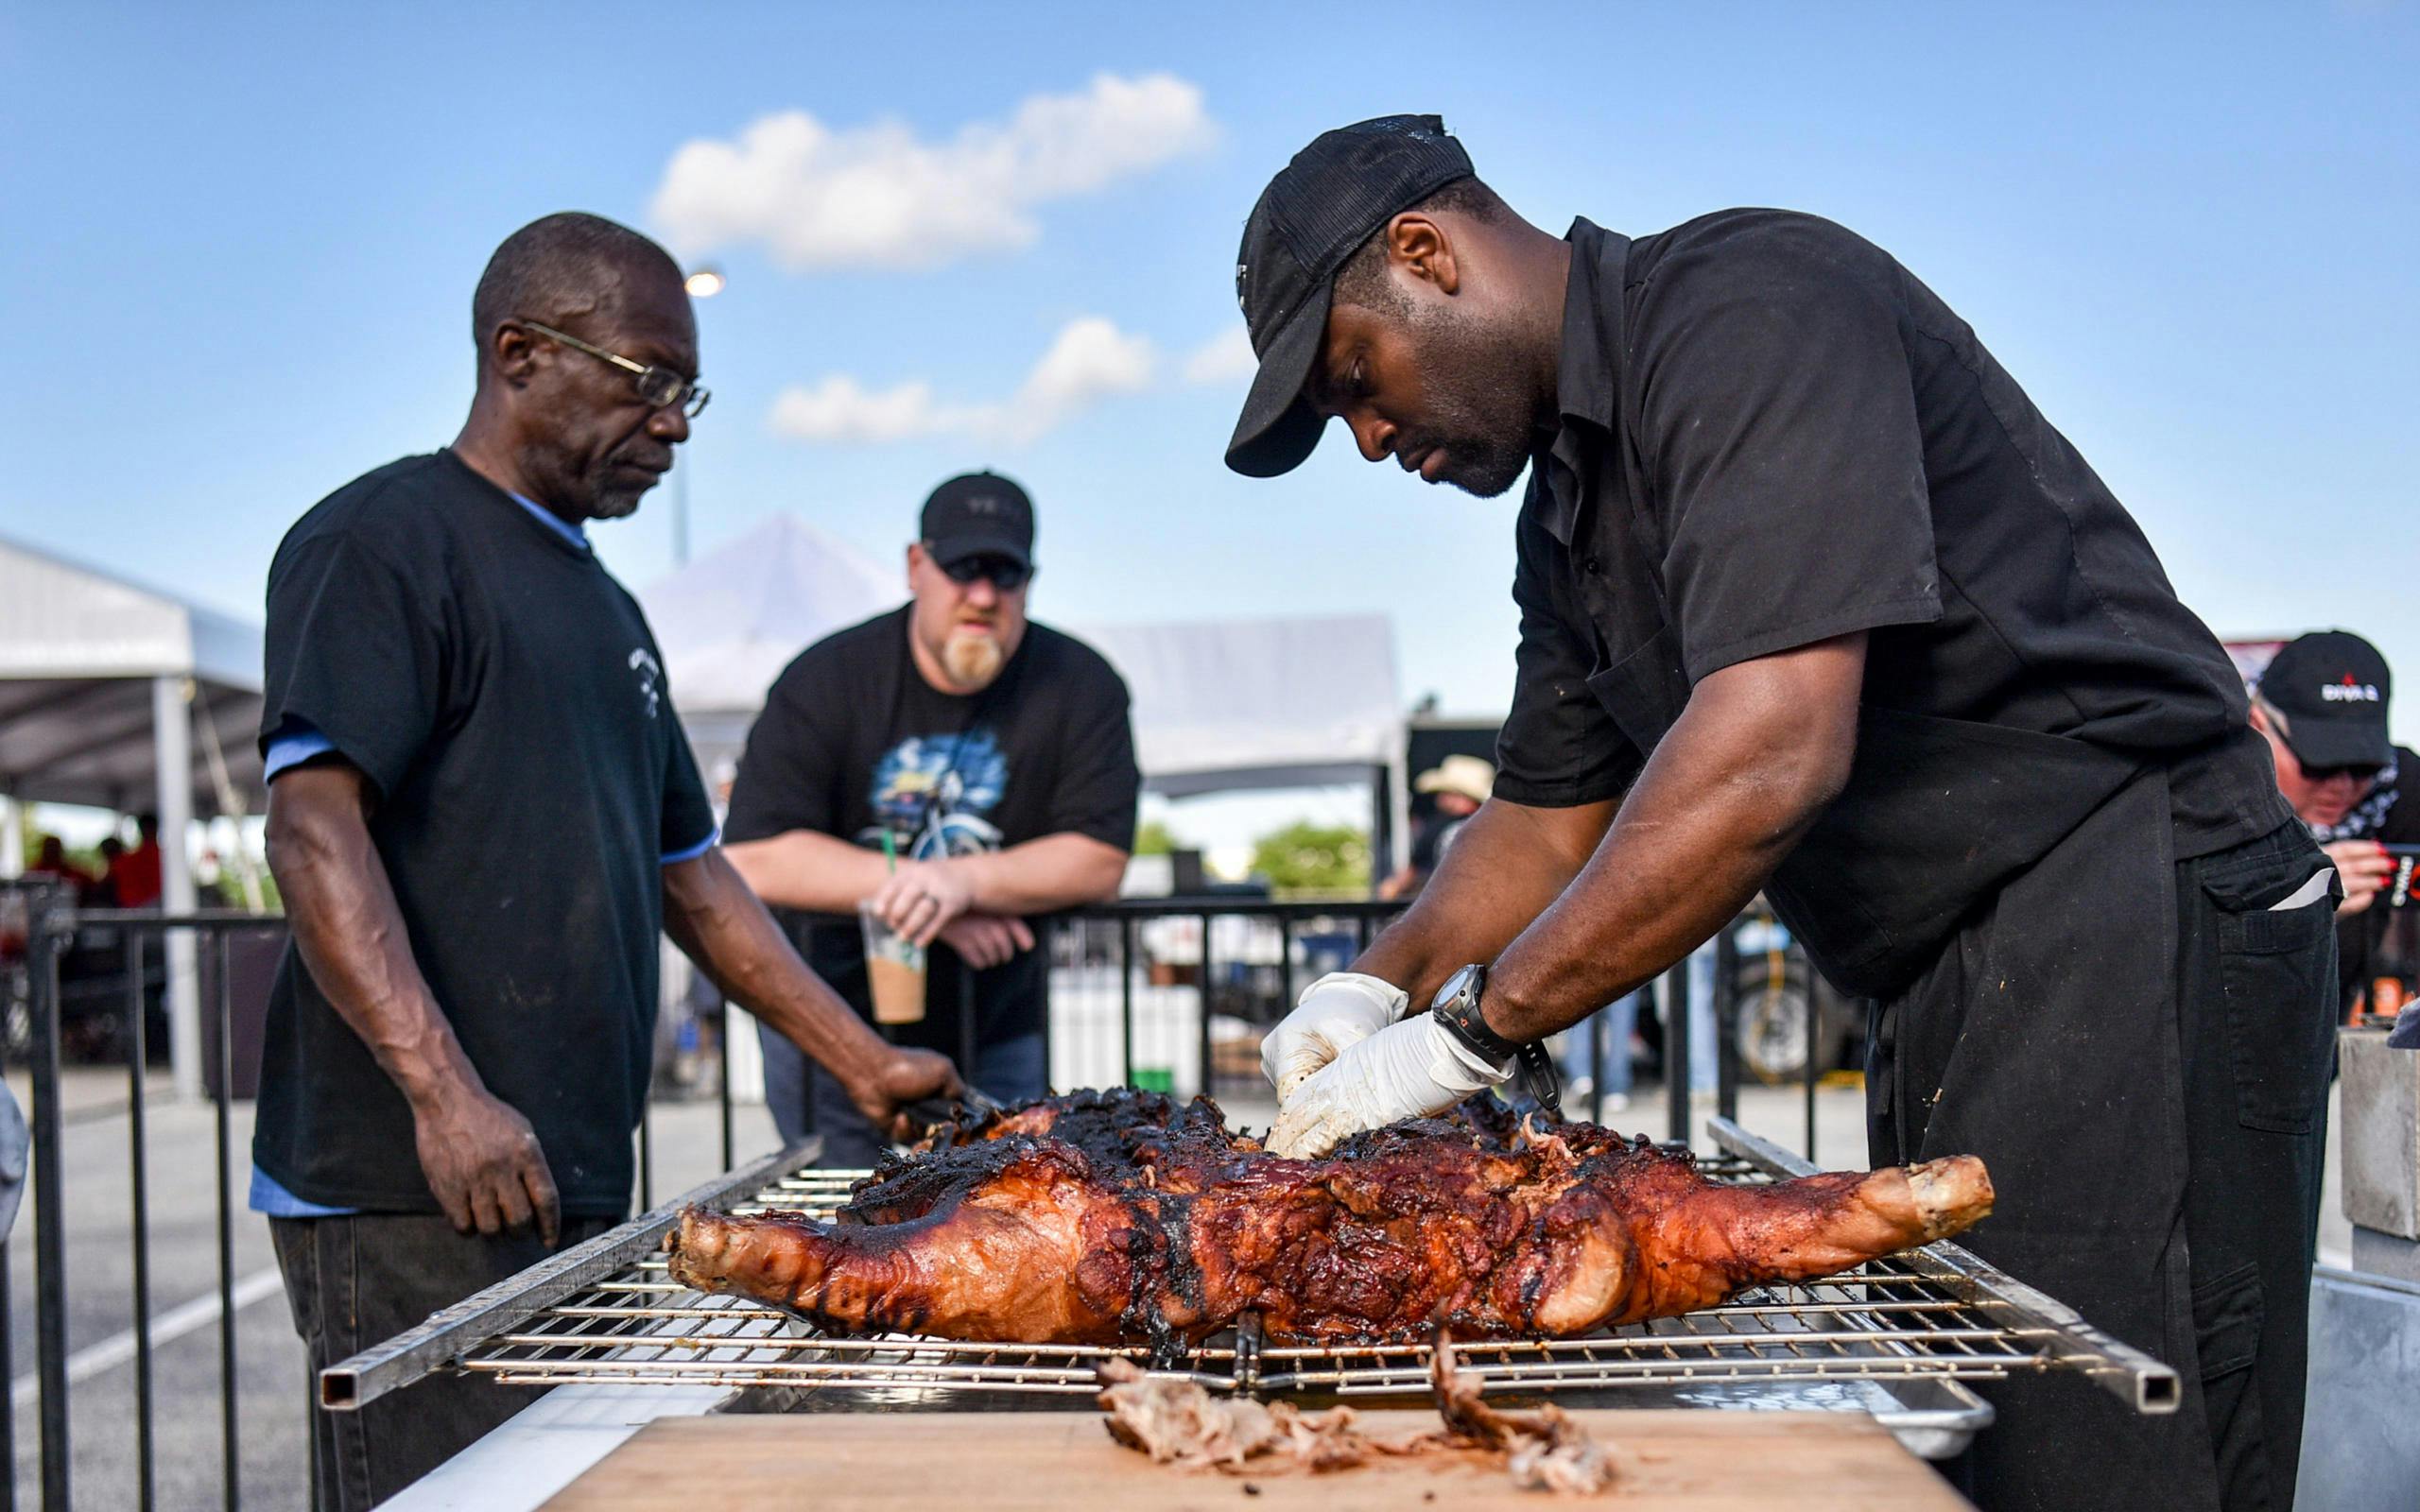 ACL Fest adds a very Texas thing: barbecue pitmasters on site